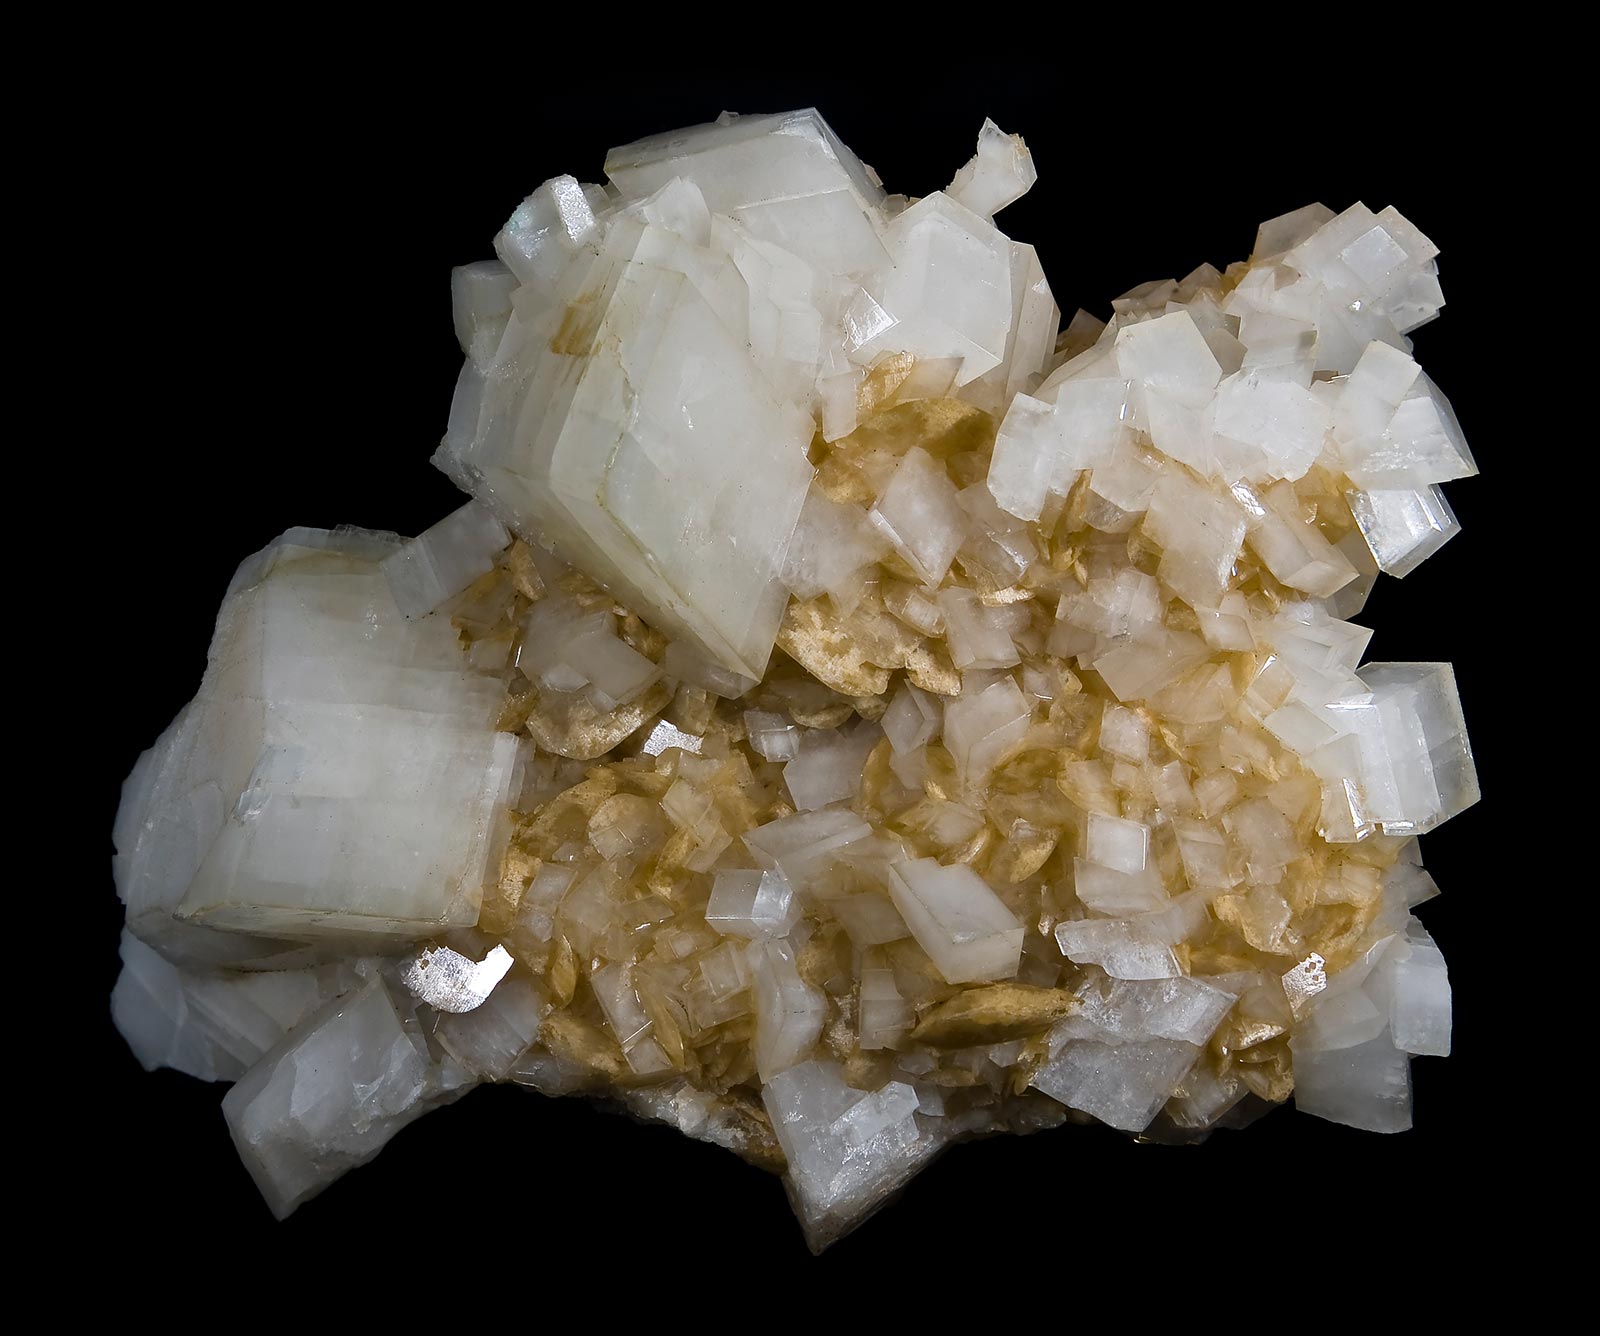 Cluster of dolomite and magnesite crystals from Azcárate Quarry, Navarre, Spain